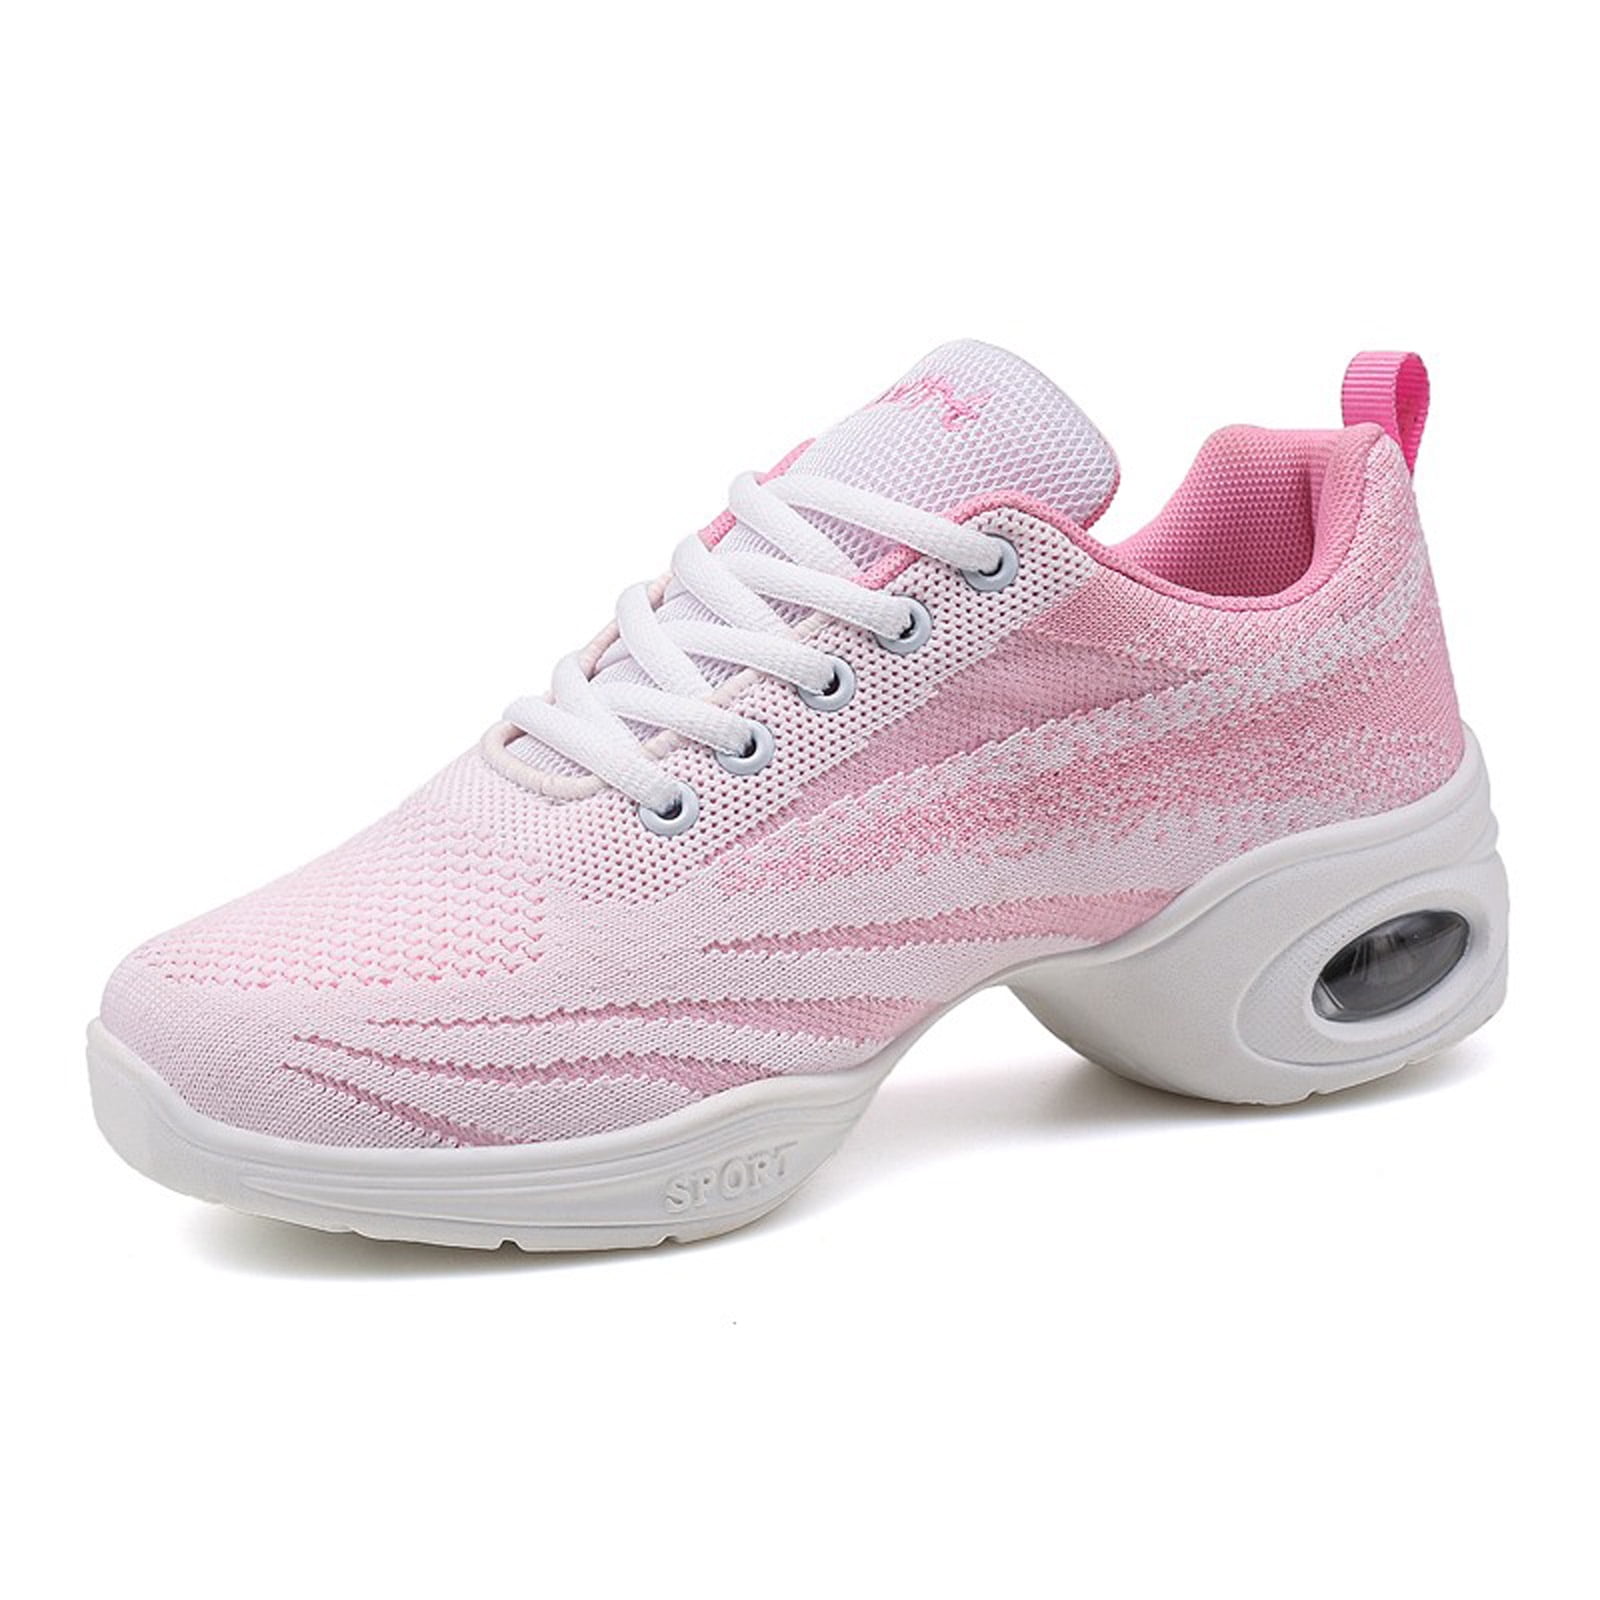 Womens Jazz Shoes Lace-up Sneakers Breathable Mesh Modern Dance Shoes Breathable Air Split-Sole Outdoor Dancing Platform Sneakers for Jazz Zumba Ballet Folk Pink 40 - Walmart.com